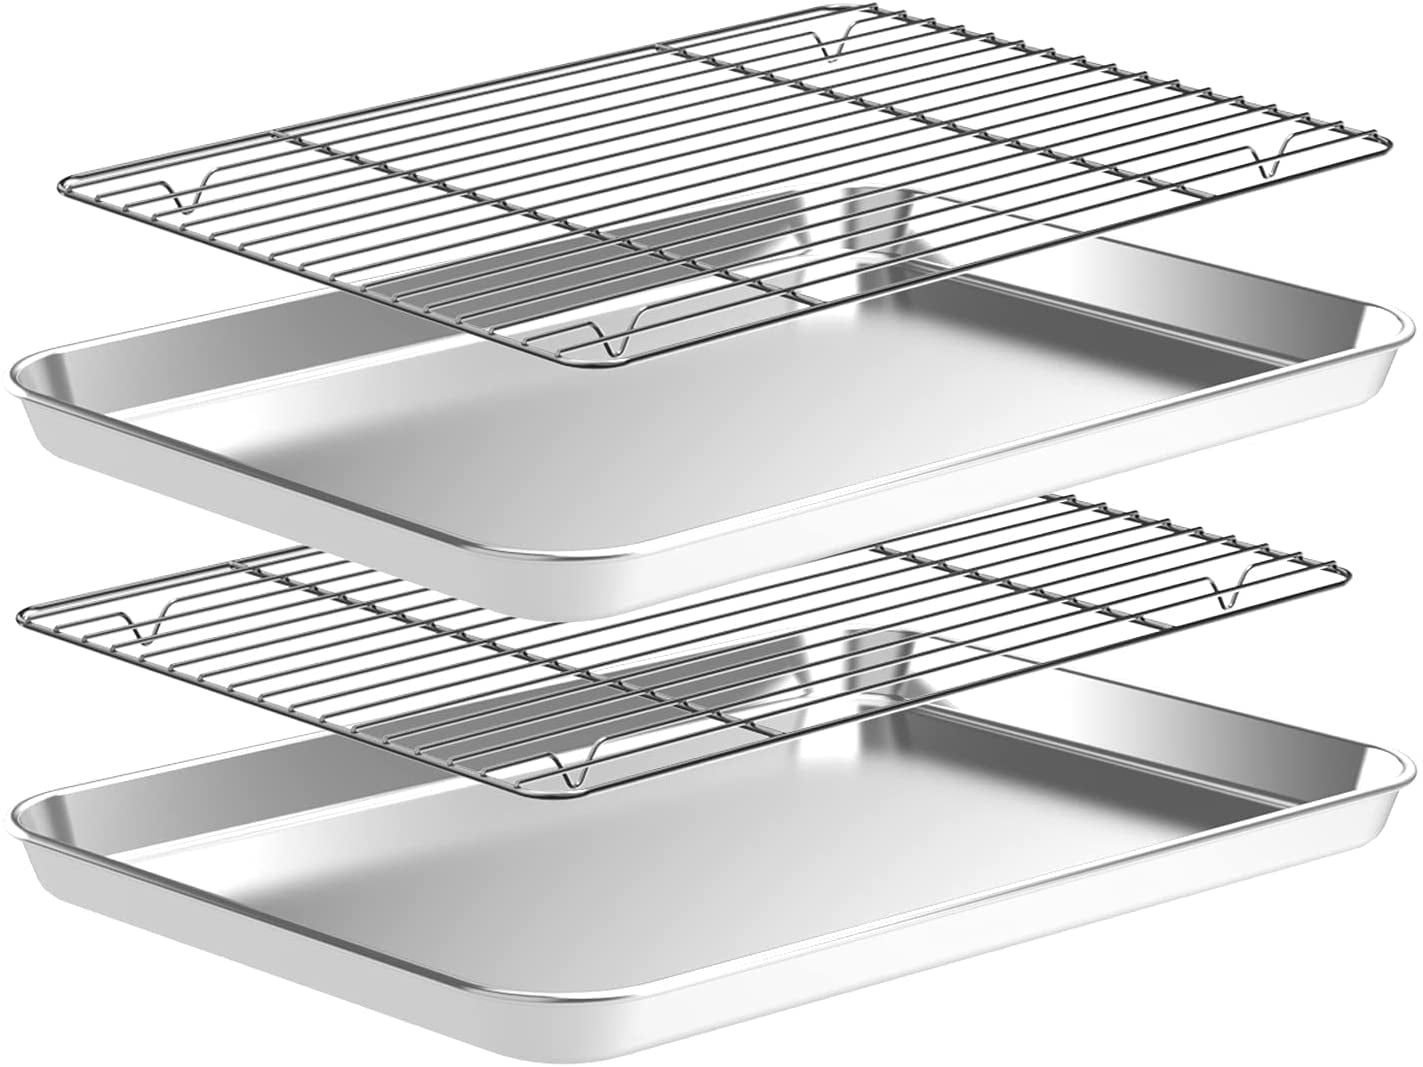 Stainless Steel Baking Tray Cooling Rack Set Grid Baking Tray Wire Rack  Square Tray Removable Kitchen Tool 